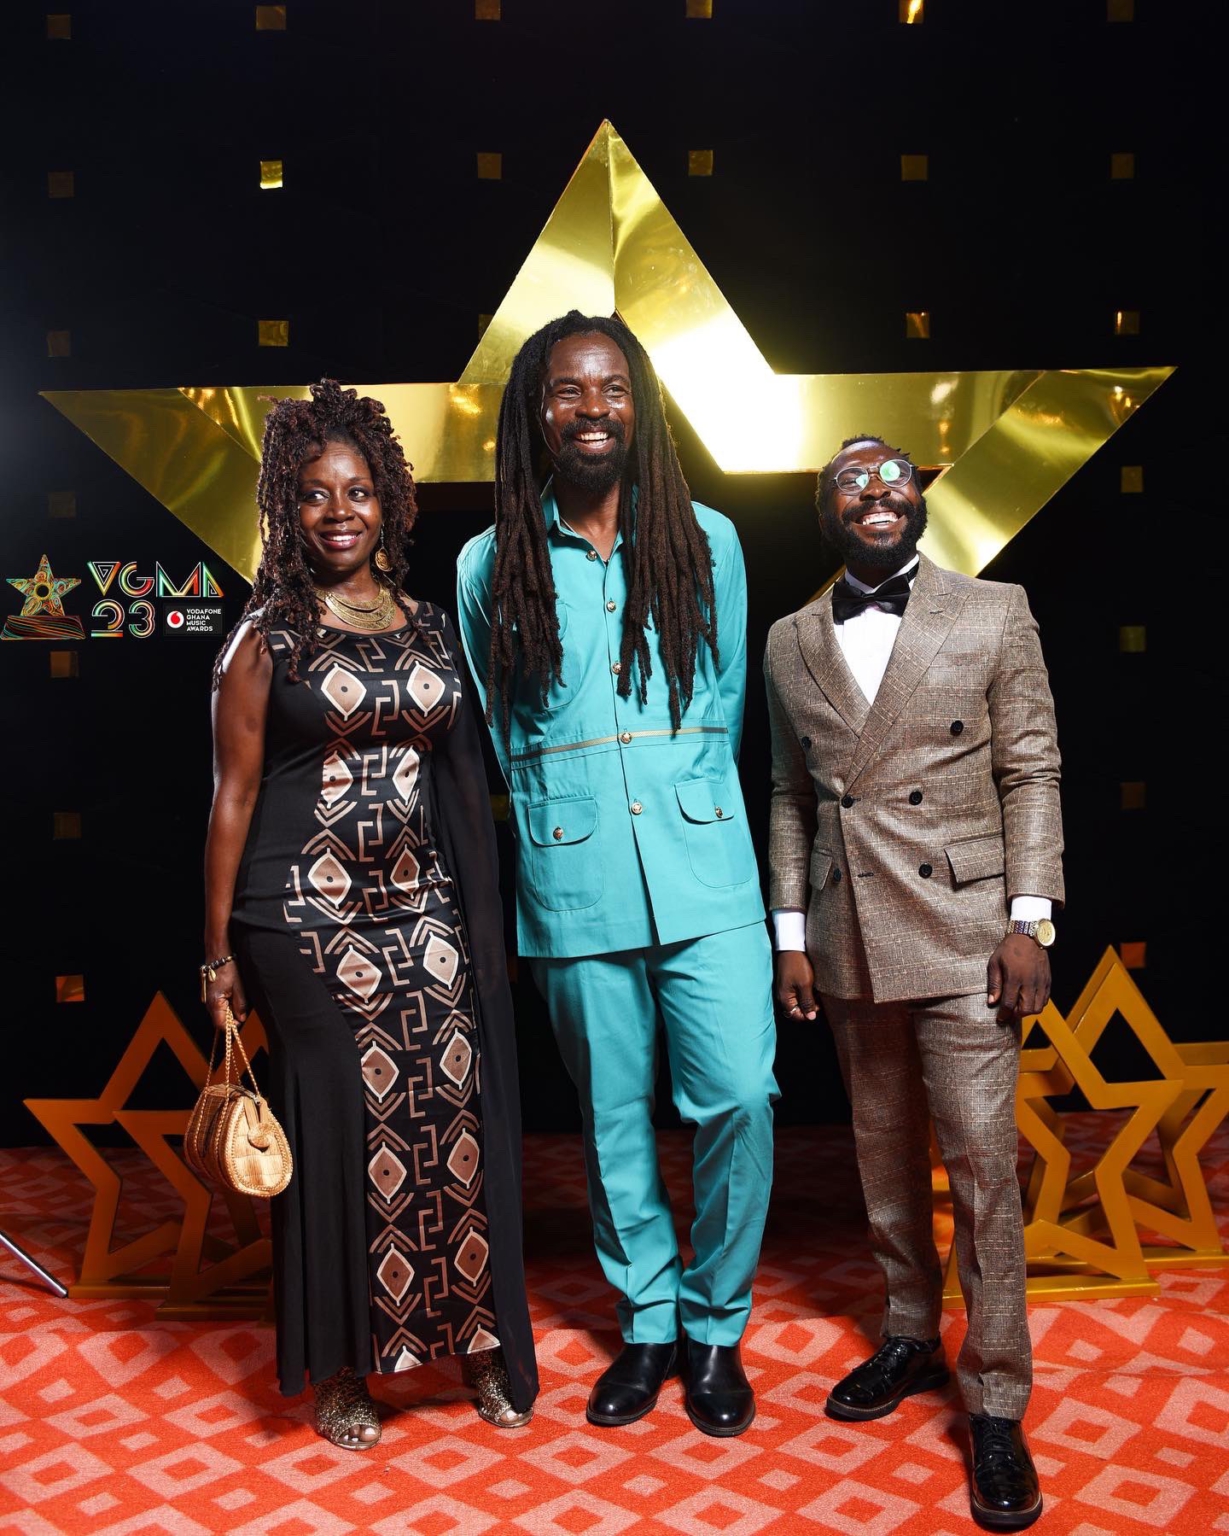 Rocky Dawuni was also on the red carpet.